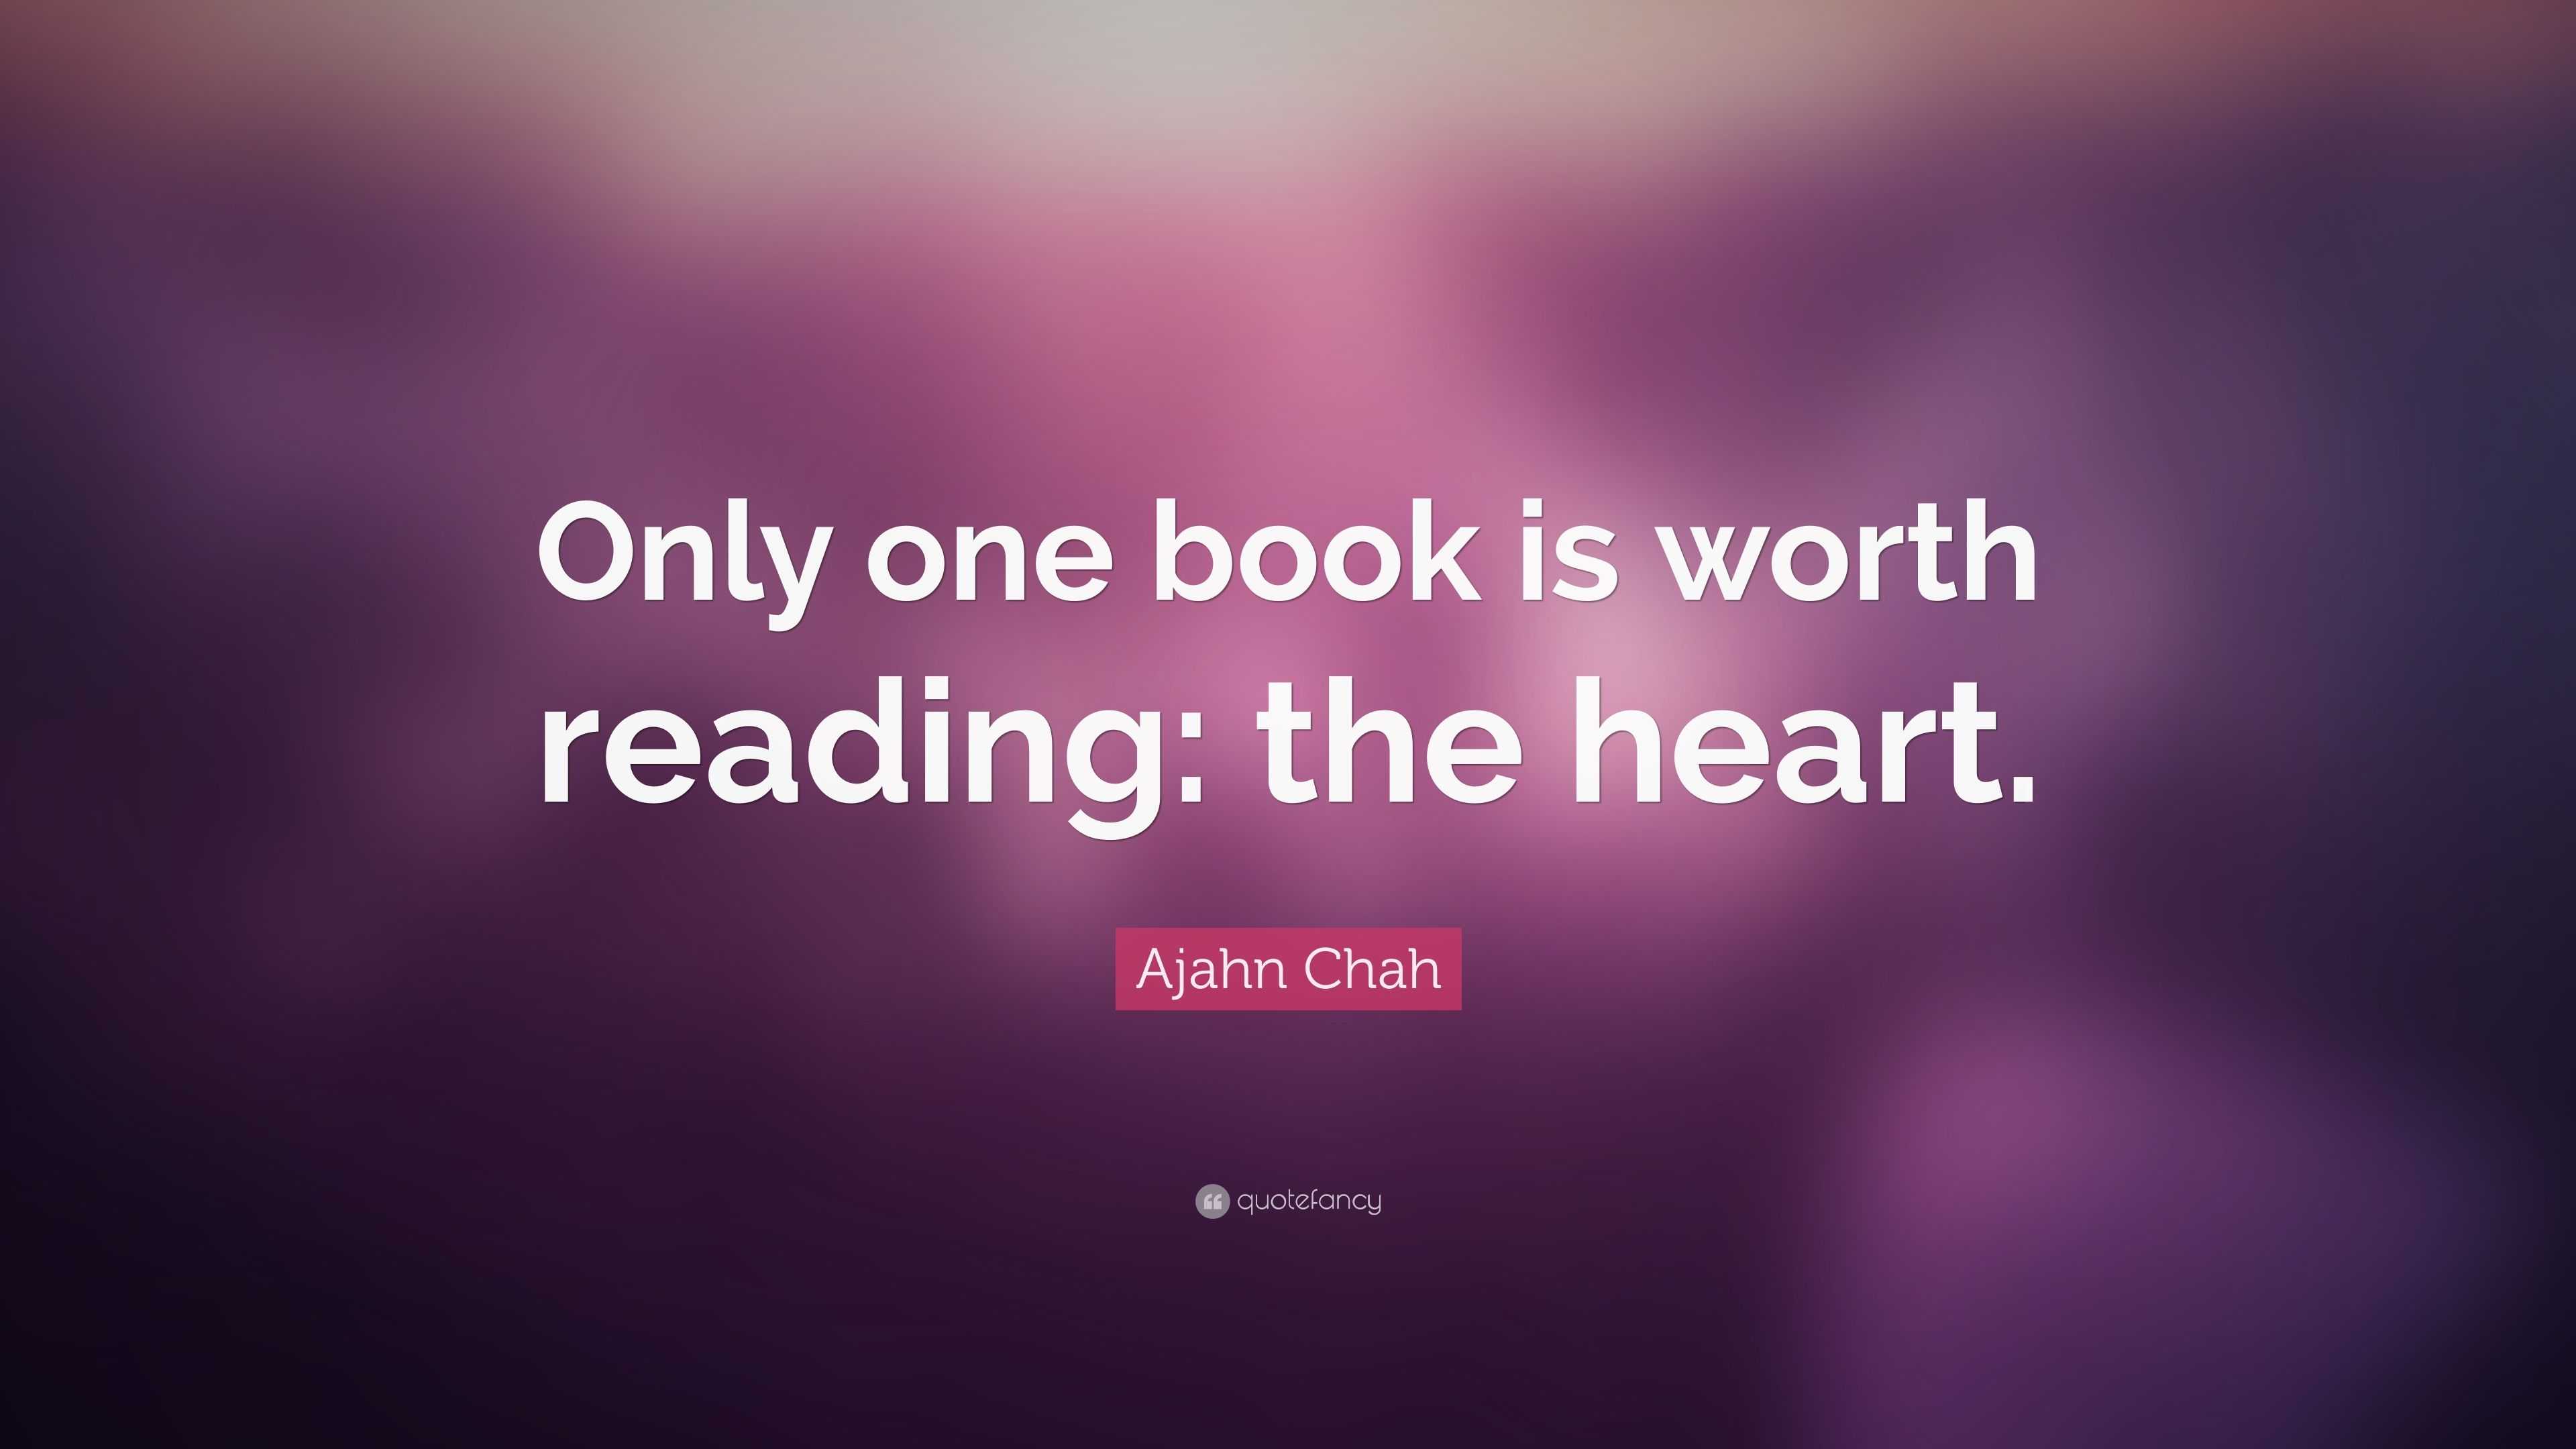 Ajahn Chah Quote: “Only one book is worth reading: the heart.”